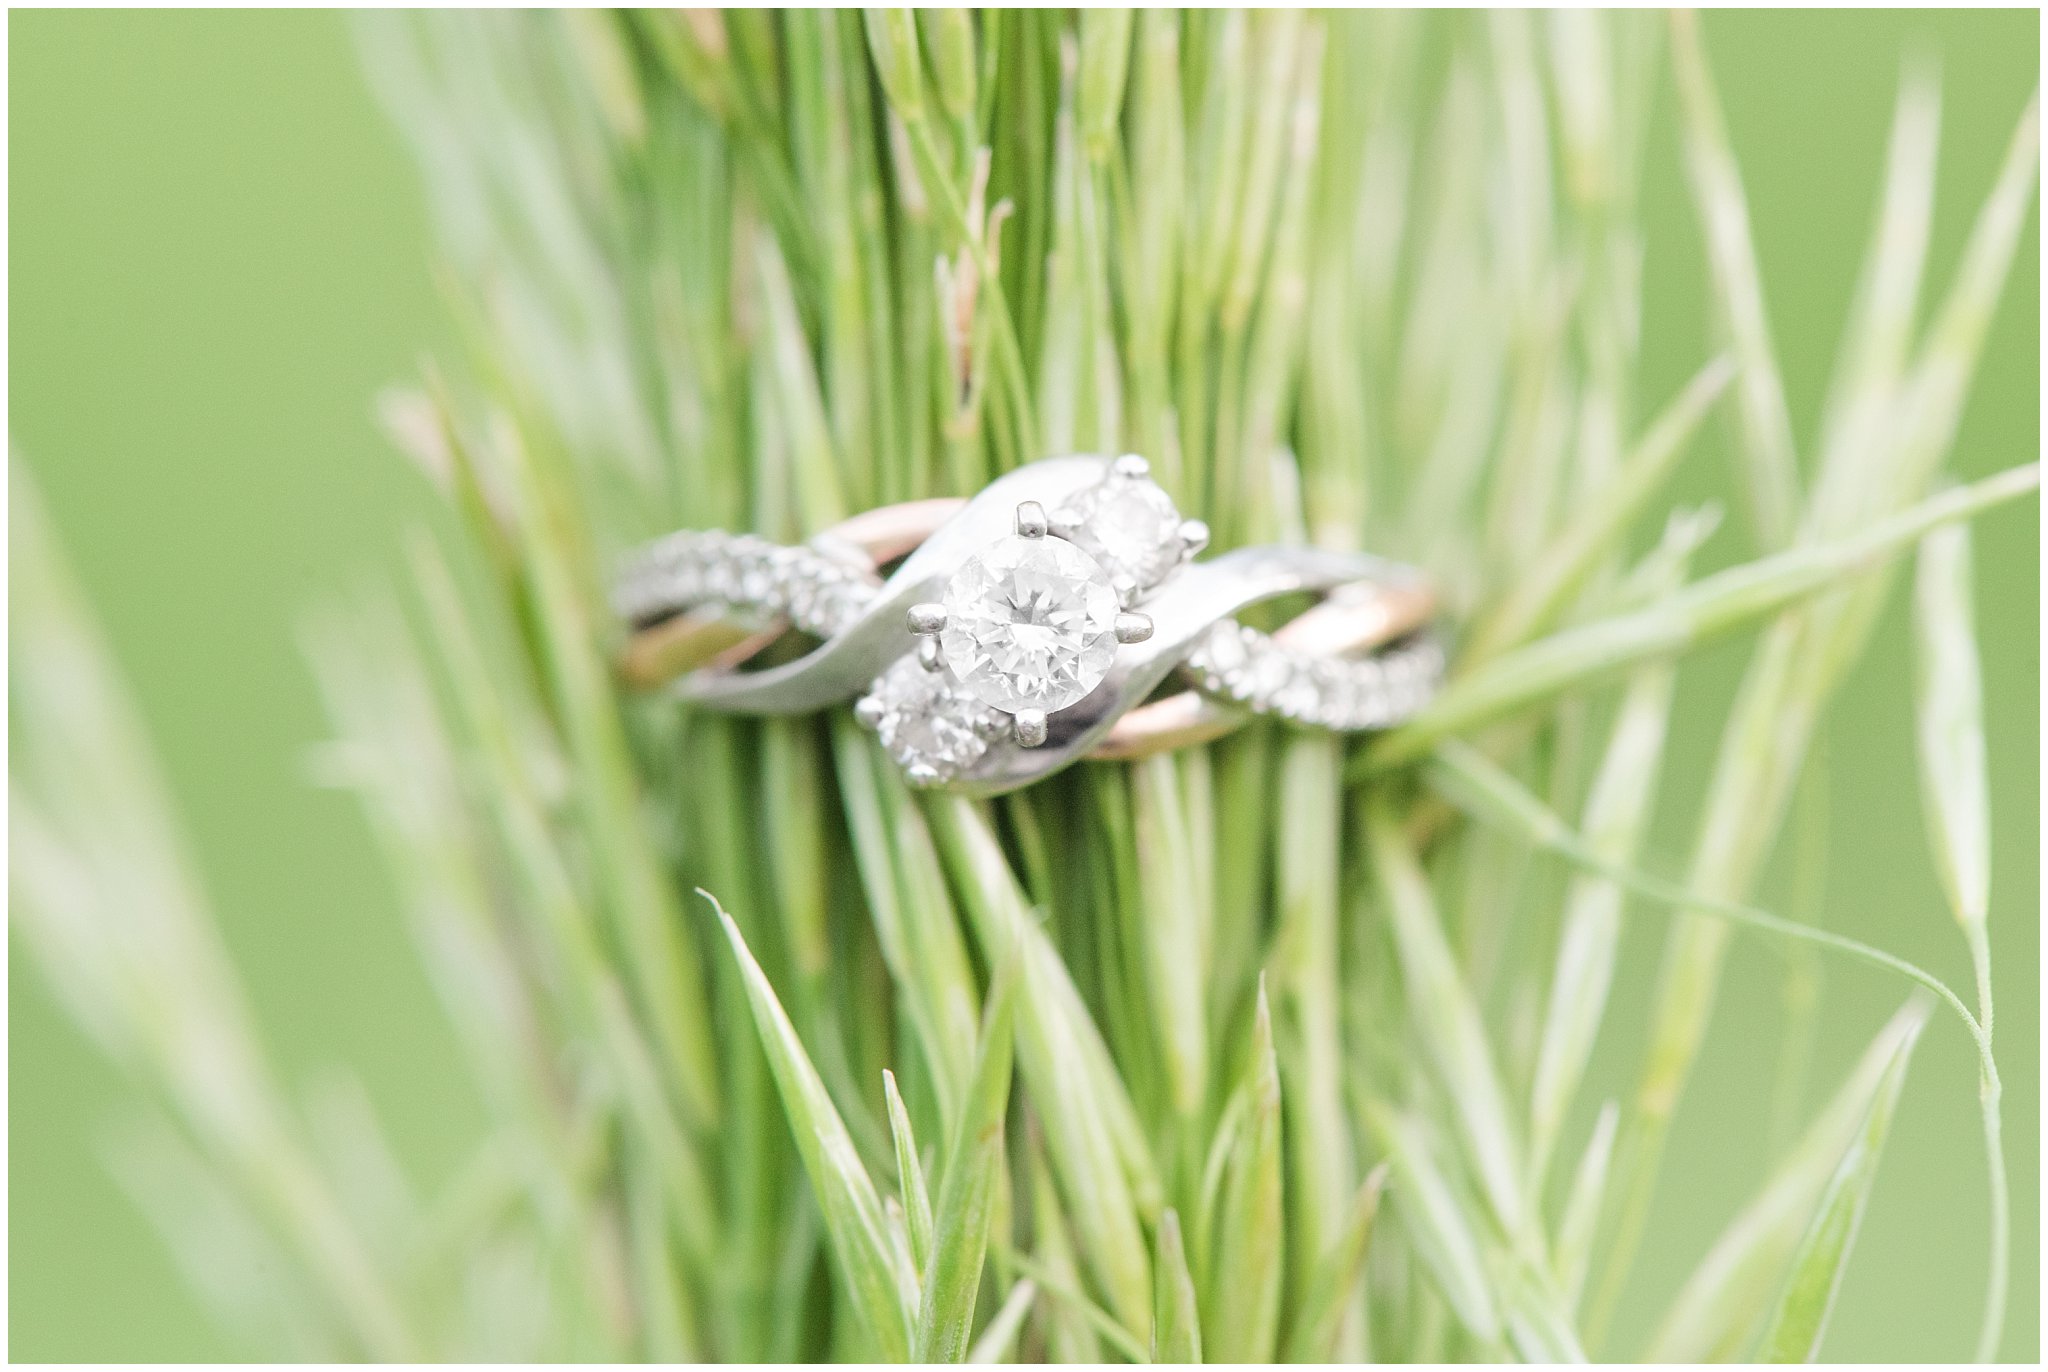 Engagement ring with two tone metals in a wooded meadow | Trapper's Loop Mountain Engagement | Utah Mountain Engagement Session | Jessie and Dallin Photography